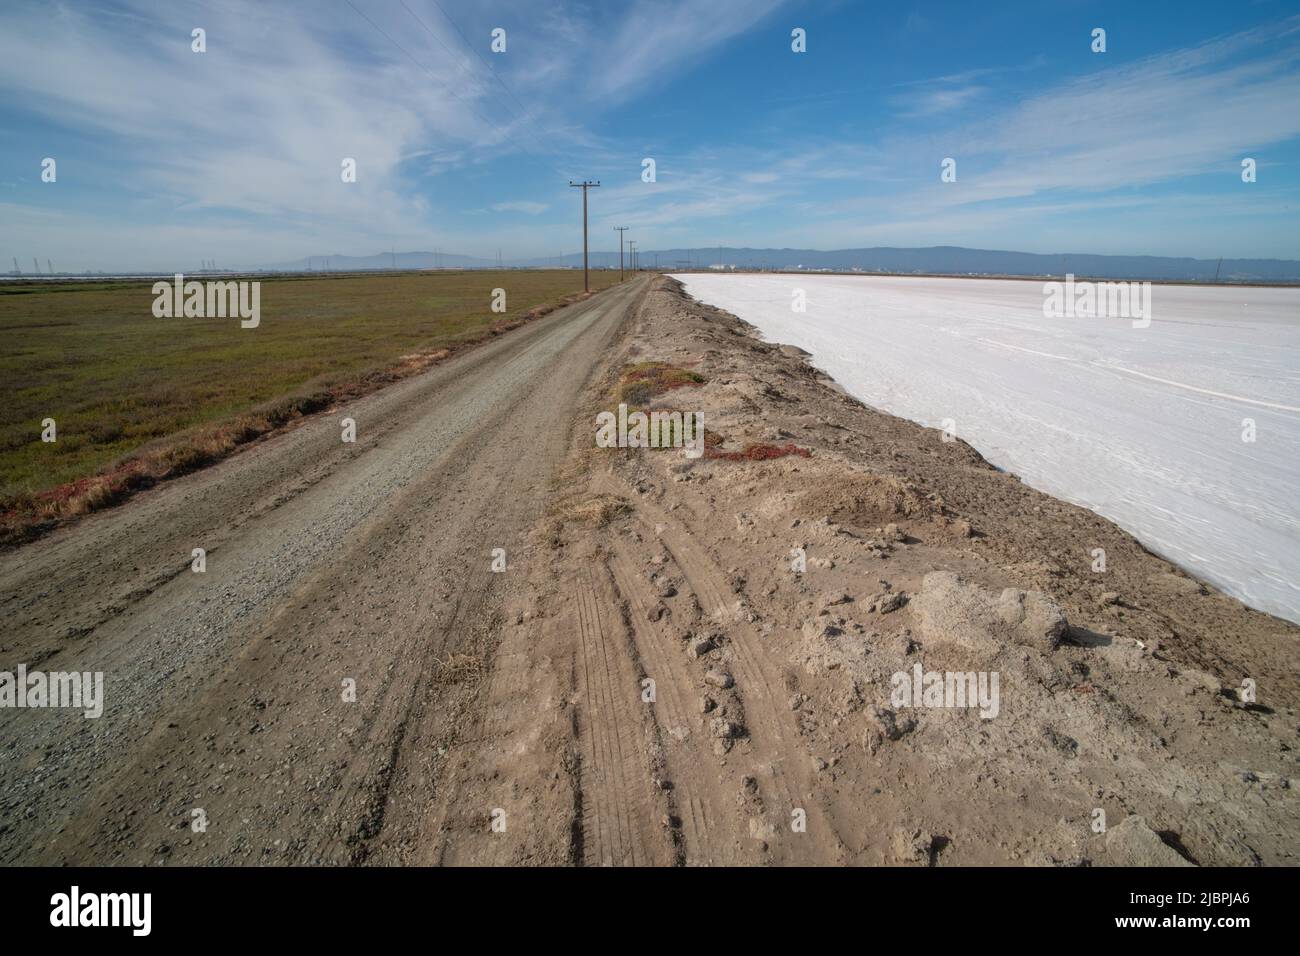 A dirt road leading away into the distance with saltmarsh on one side and fields of salt on the other. Stock Photo